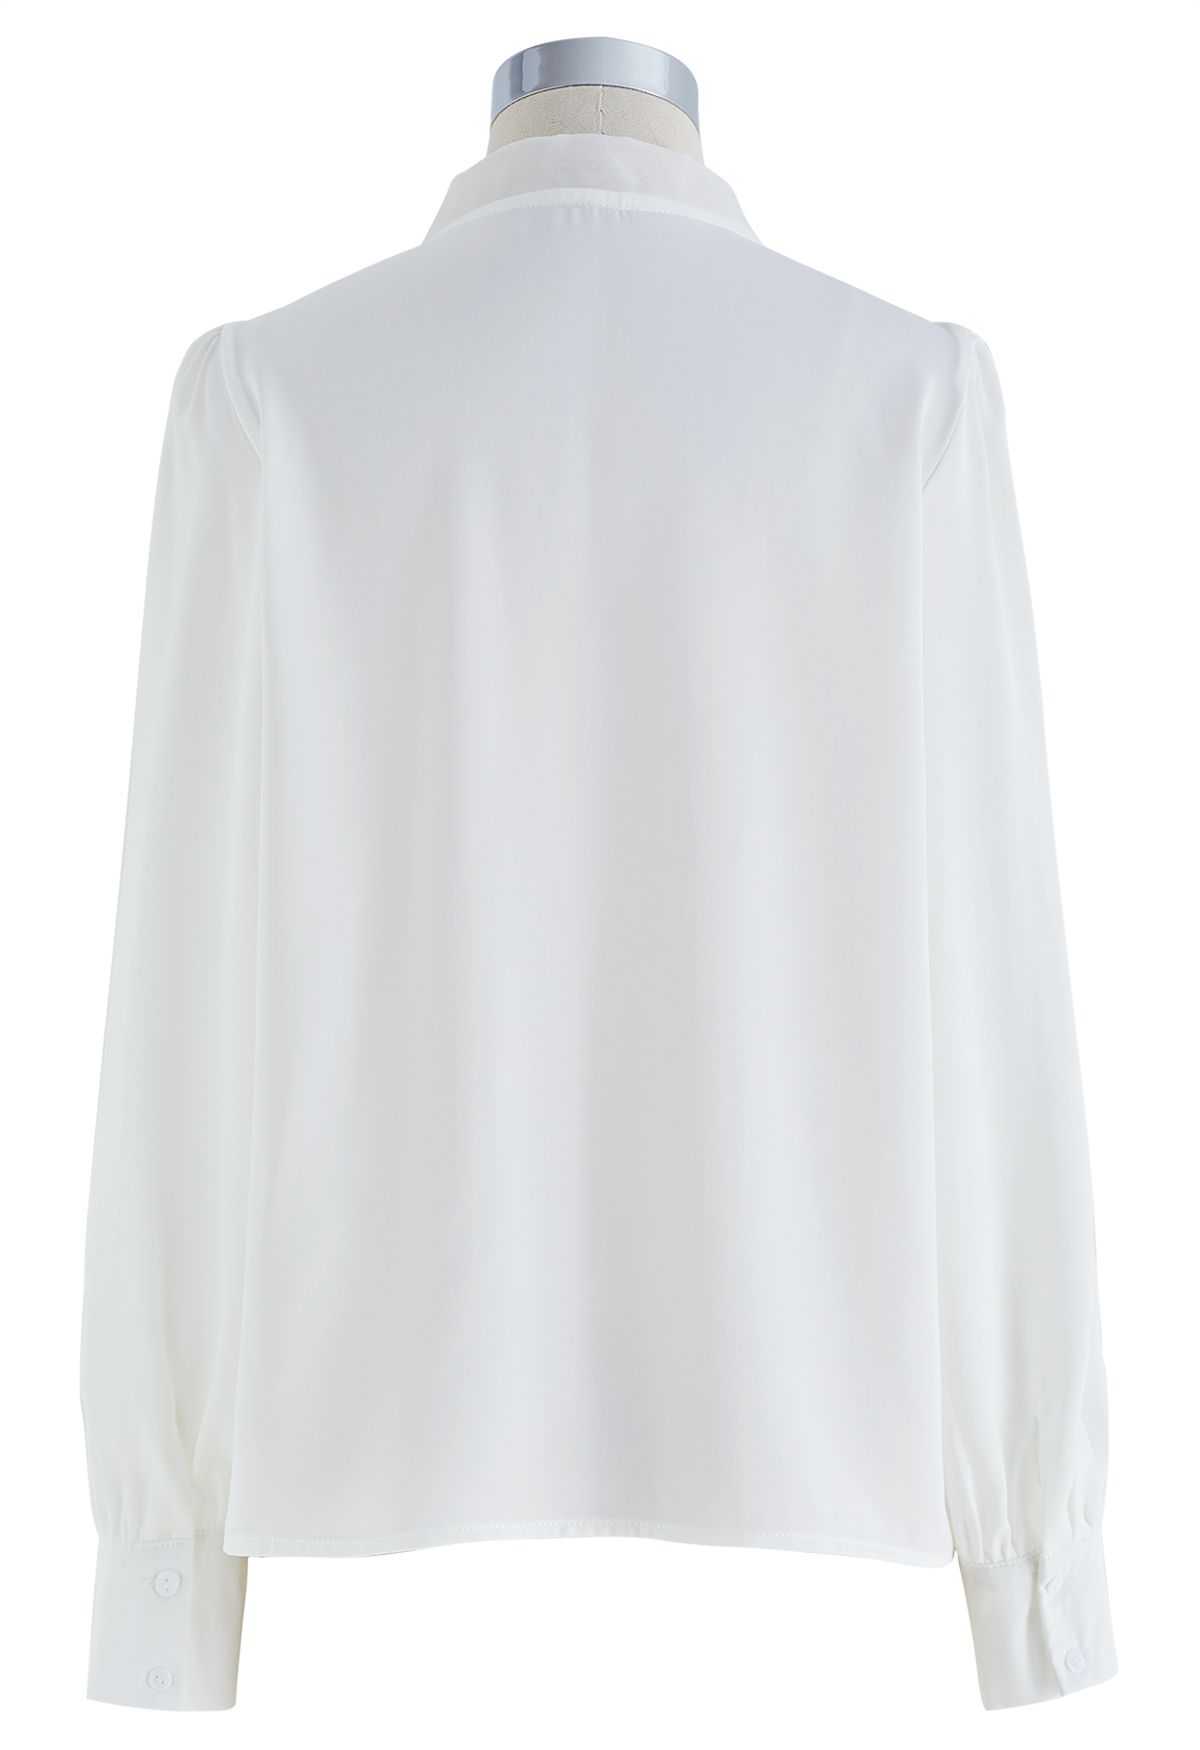 Satin Finish Pearl Knot Shirt in White